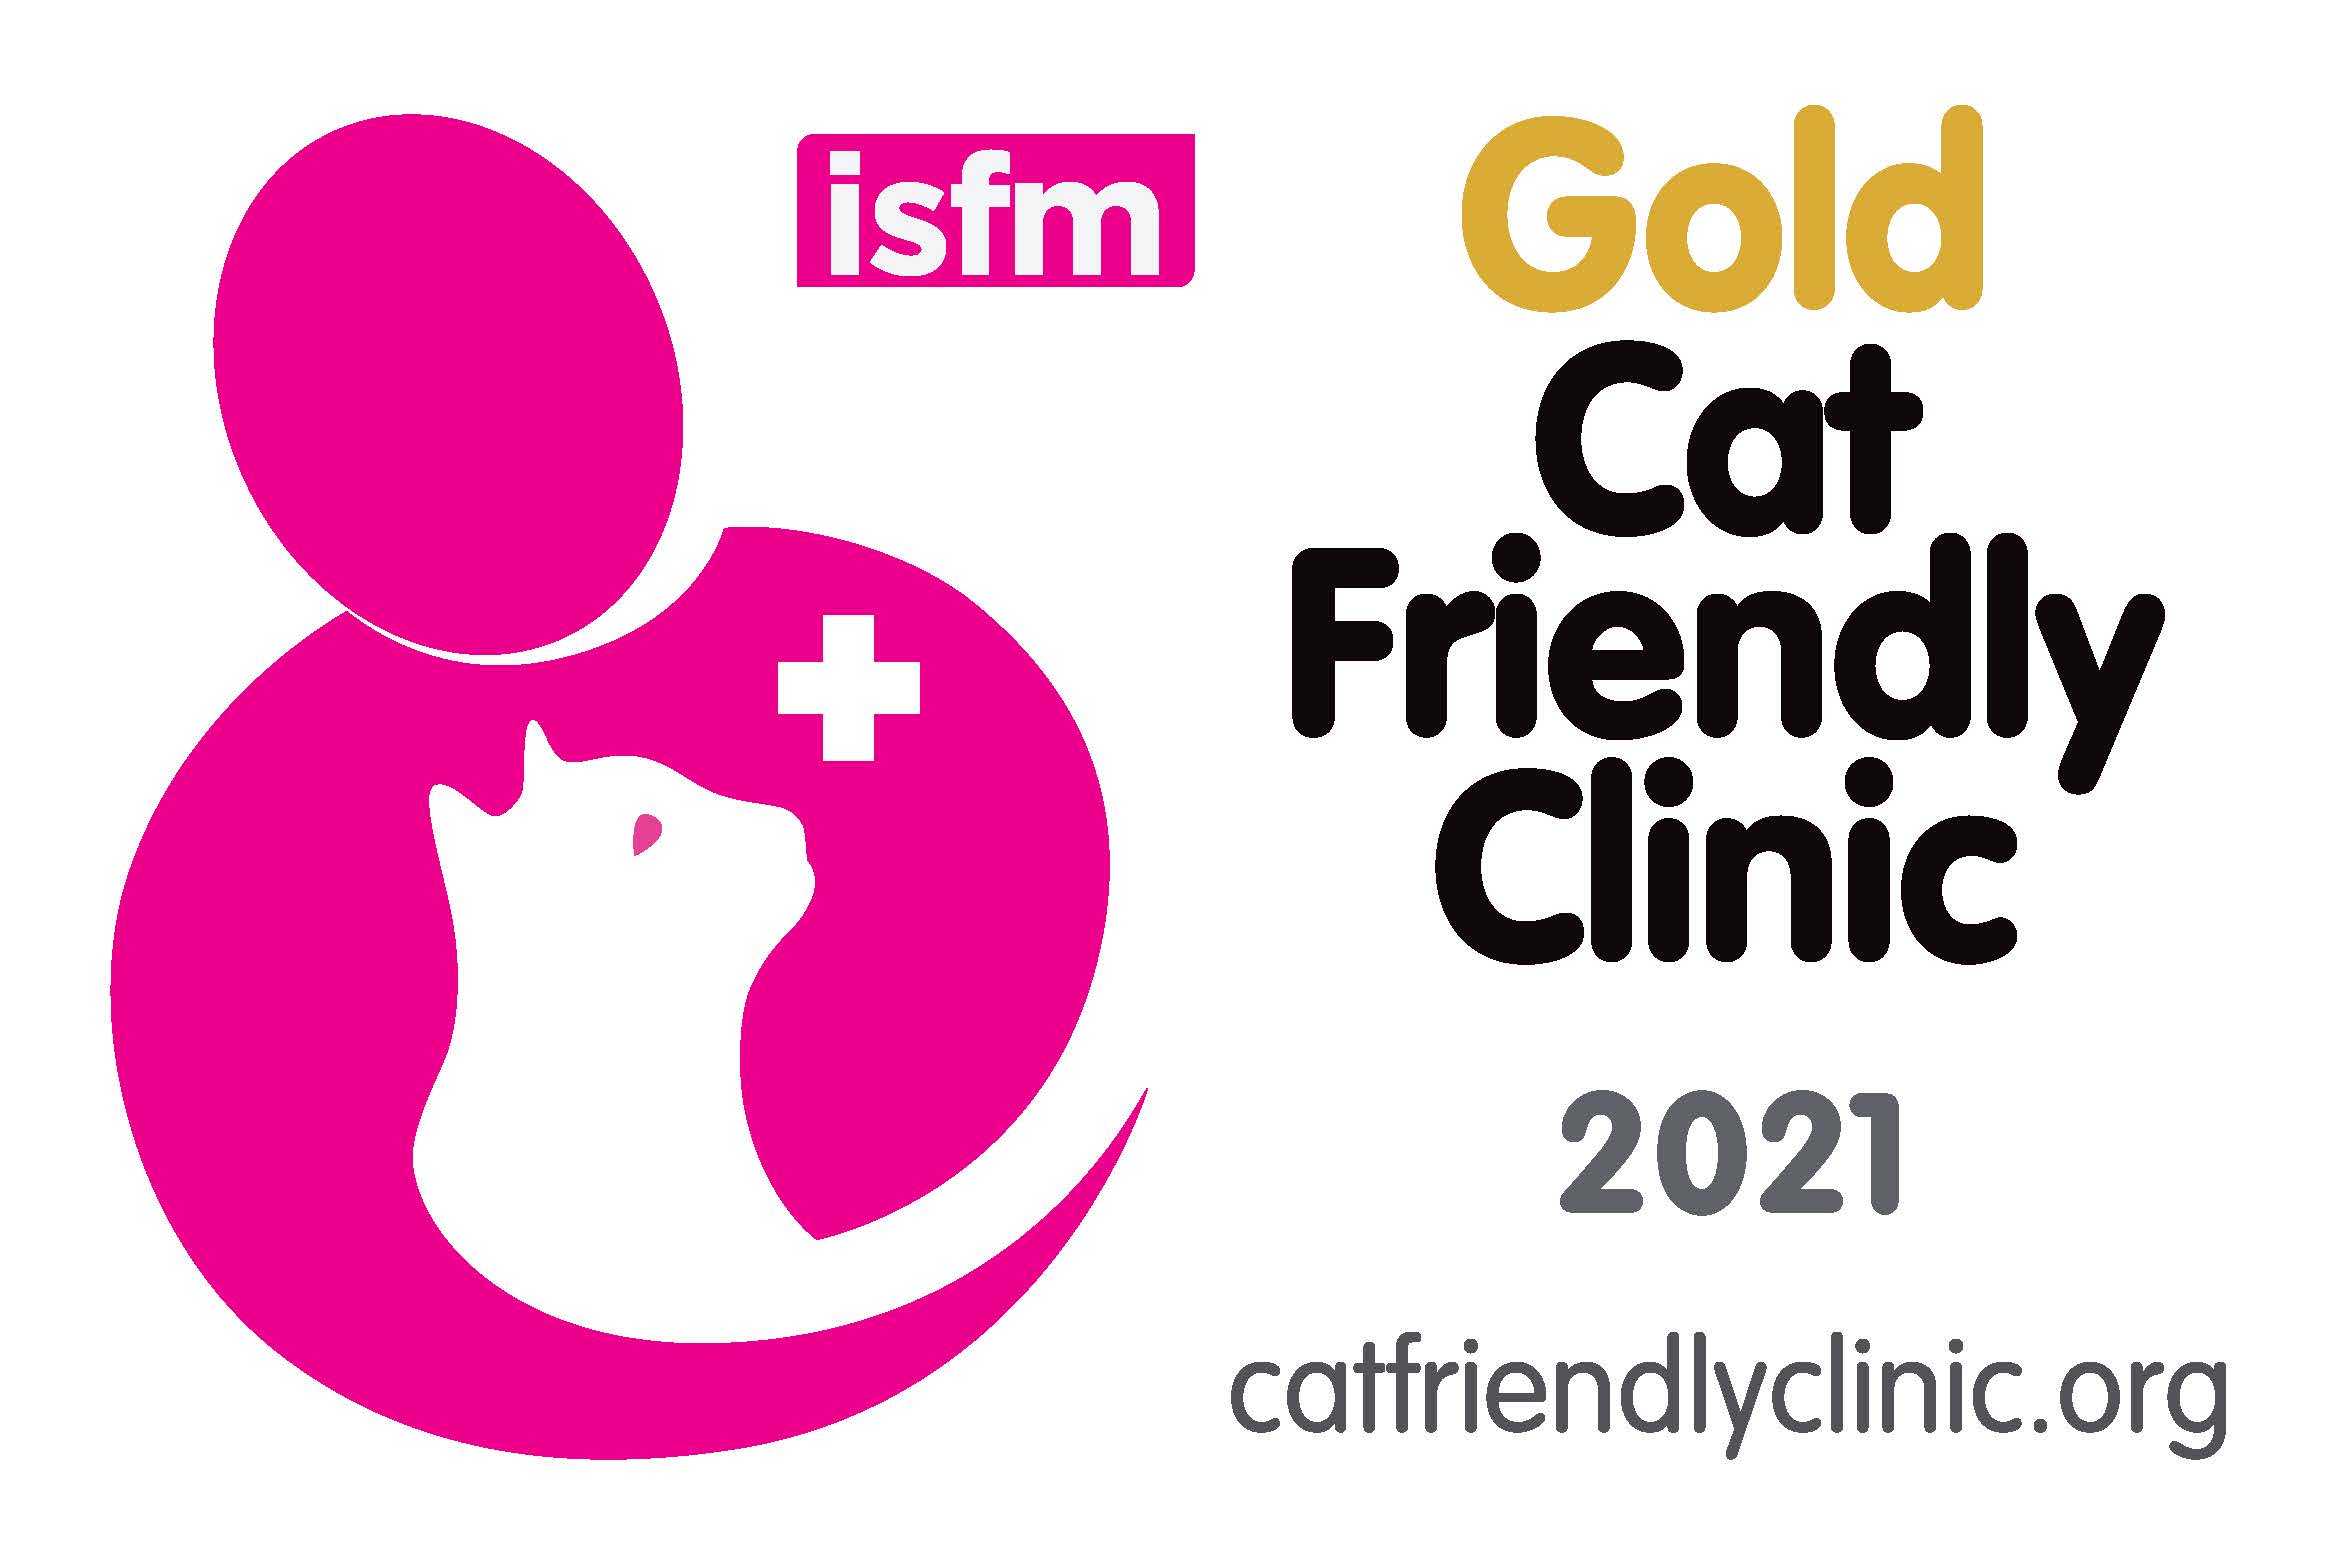 Pets'n'Vets is an accredited Gold Cat Friendly Clinic